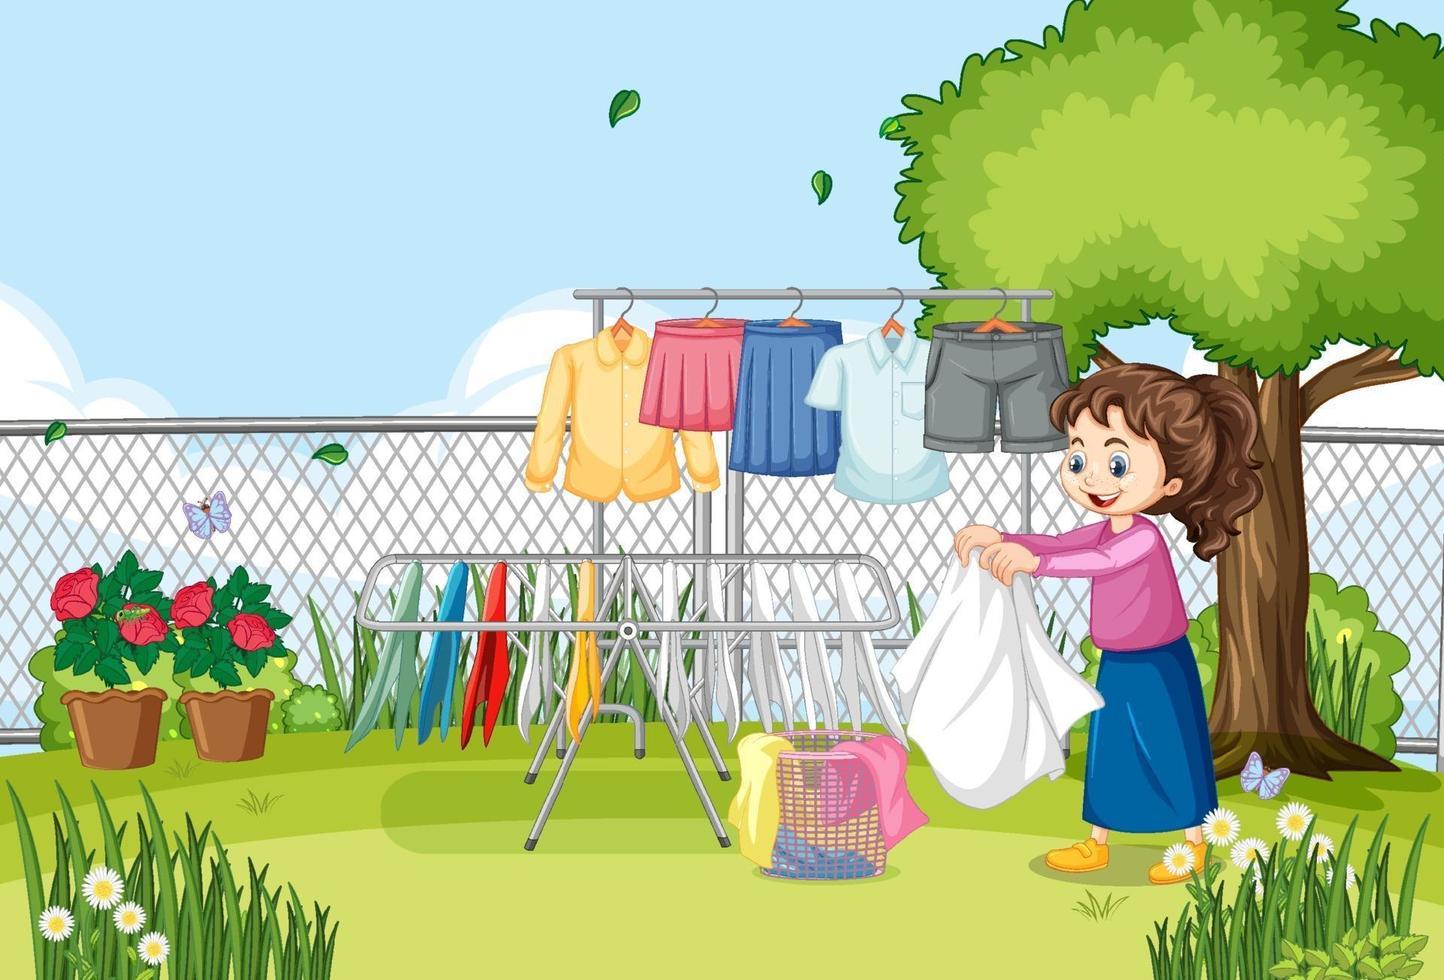 Outdoor scene with a girl hanging clothes on clotheslines vector